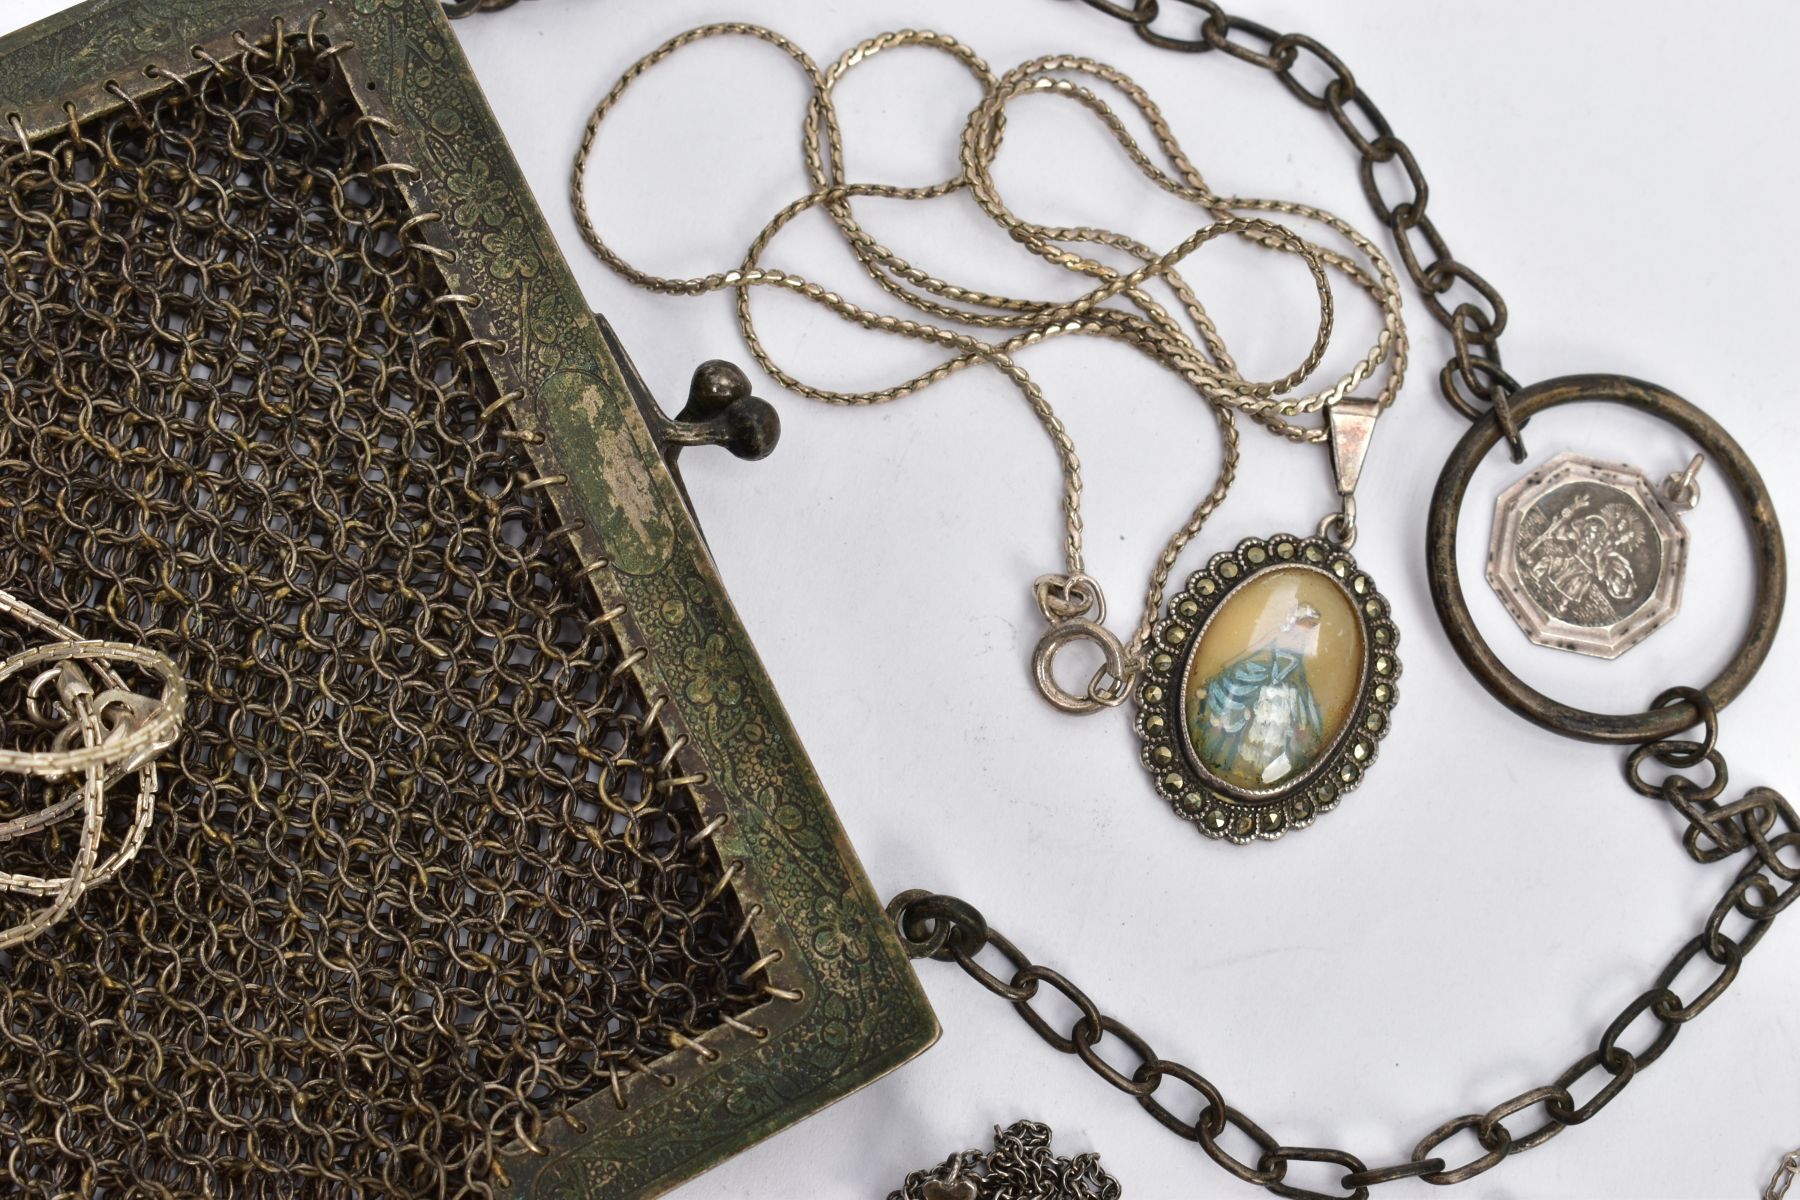 A SELECTION OF WHITE METAL JEWELLERY AND A METAL MESH COIN PURSE, four white metal floral style - Image 5 of 5